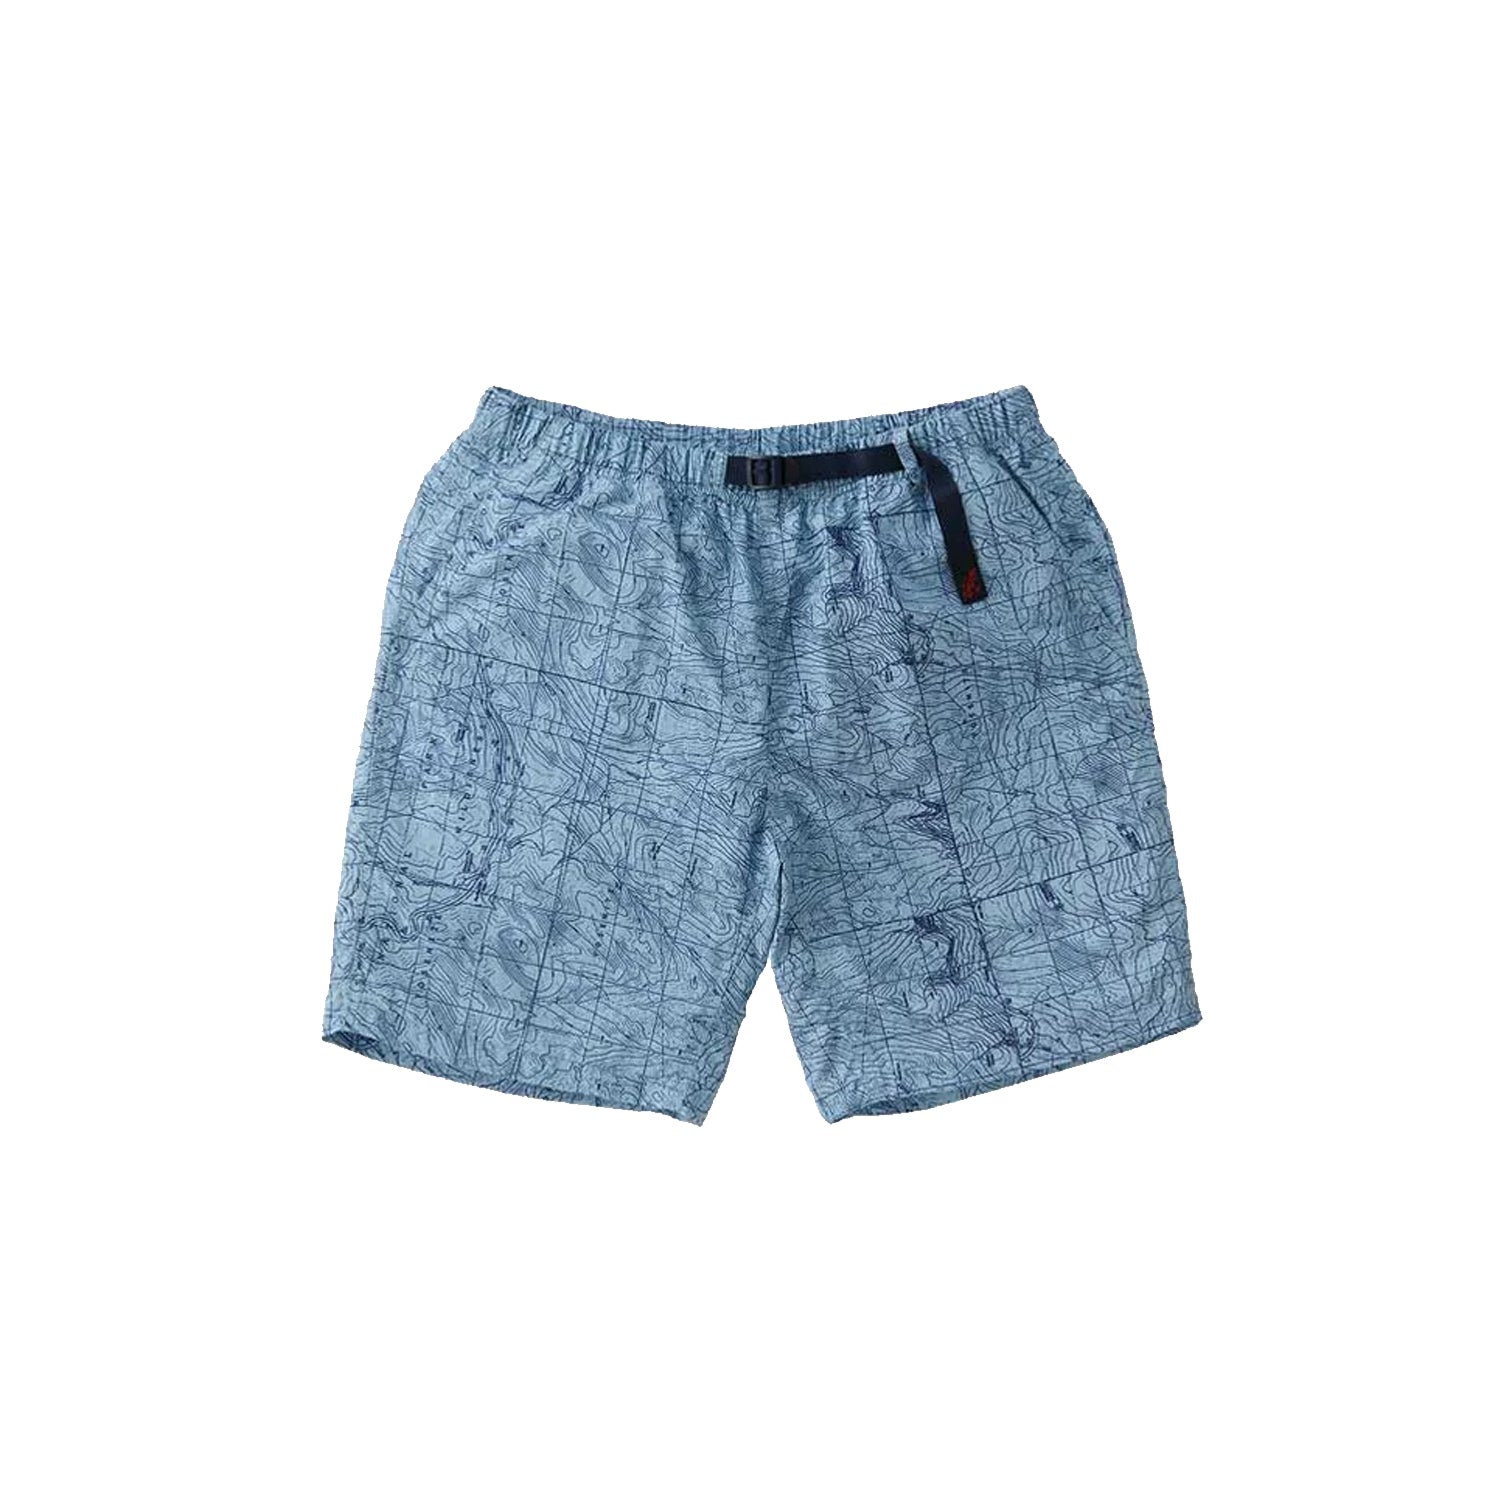 Alpine Packable Short YOSEMITE BLUE

Made from Durable Nylon Material - Nylon 100%
Available in new colors Yosemite Green and Yosemite Blue
Packable shorts
Topographic map graphic print shorts
Water-repellent and wind-resistant shorts
 GRAMICCI